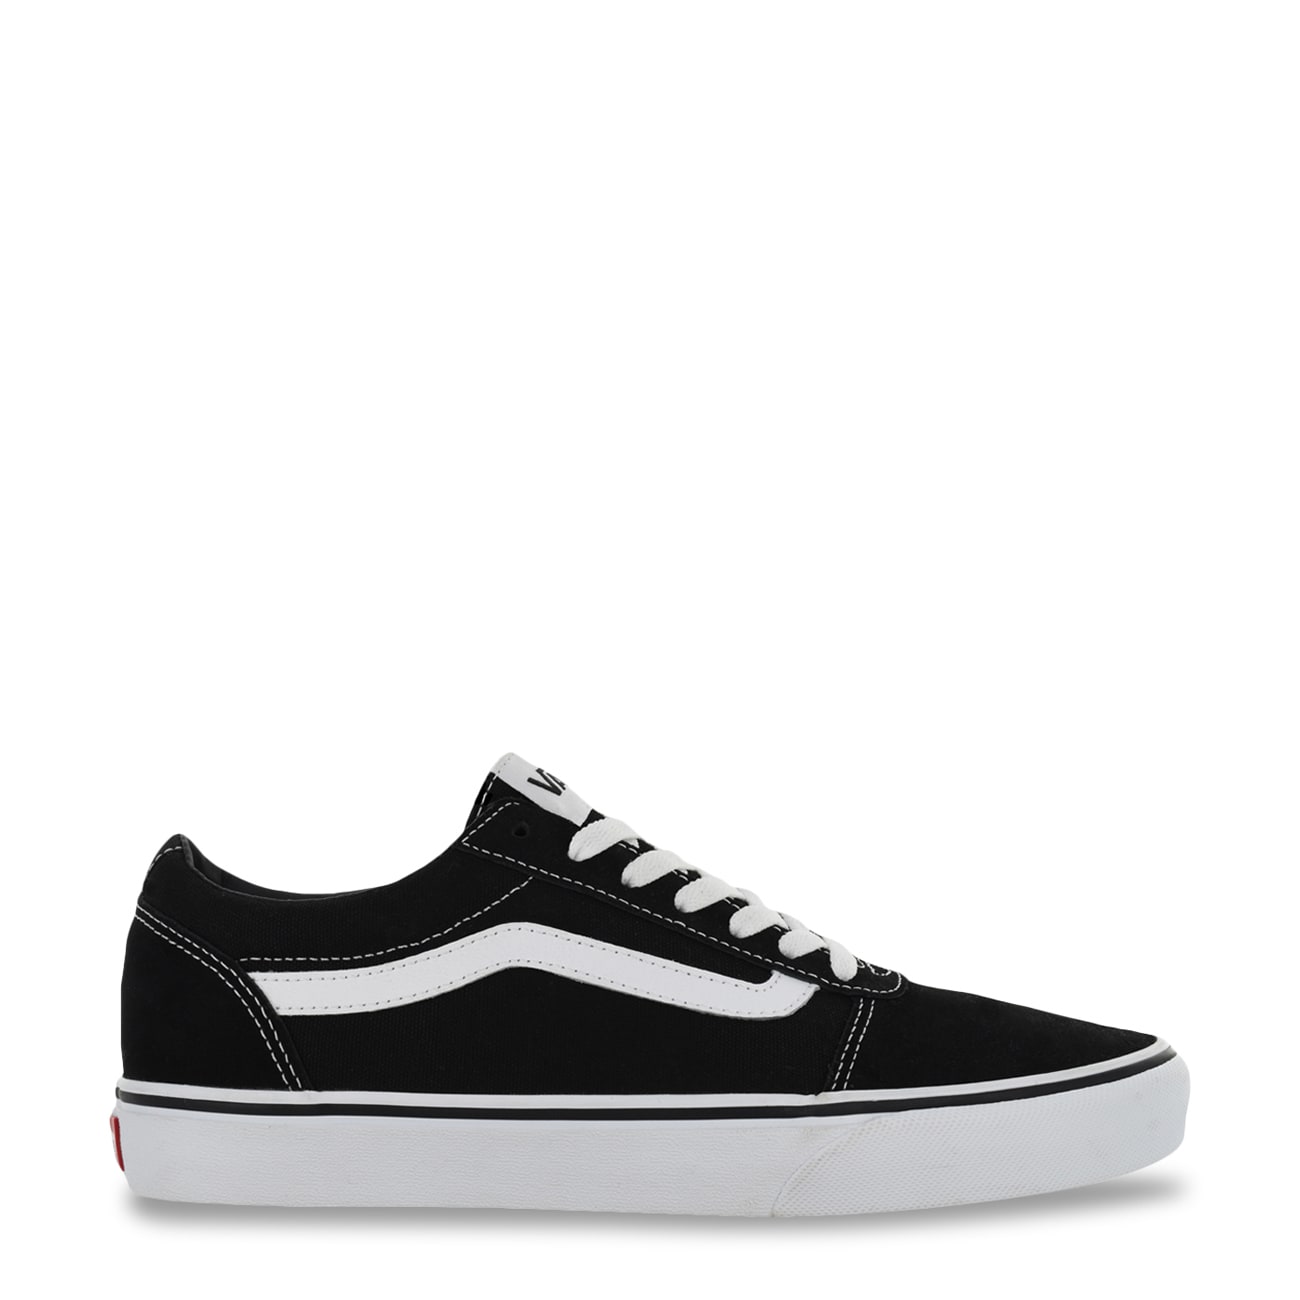 places to buy vans shoes near me